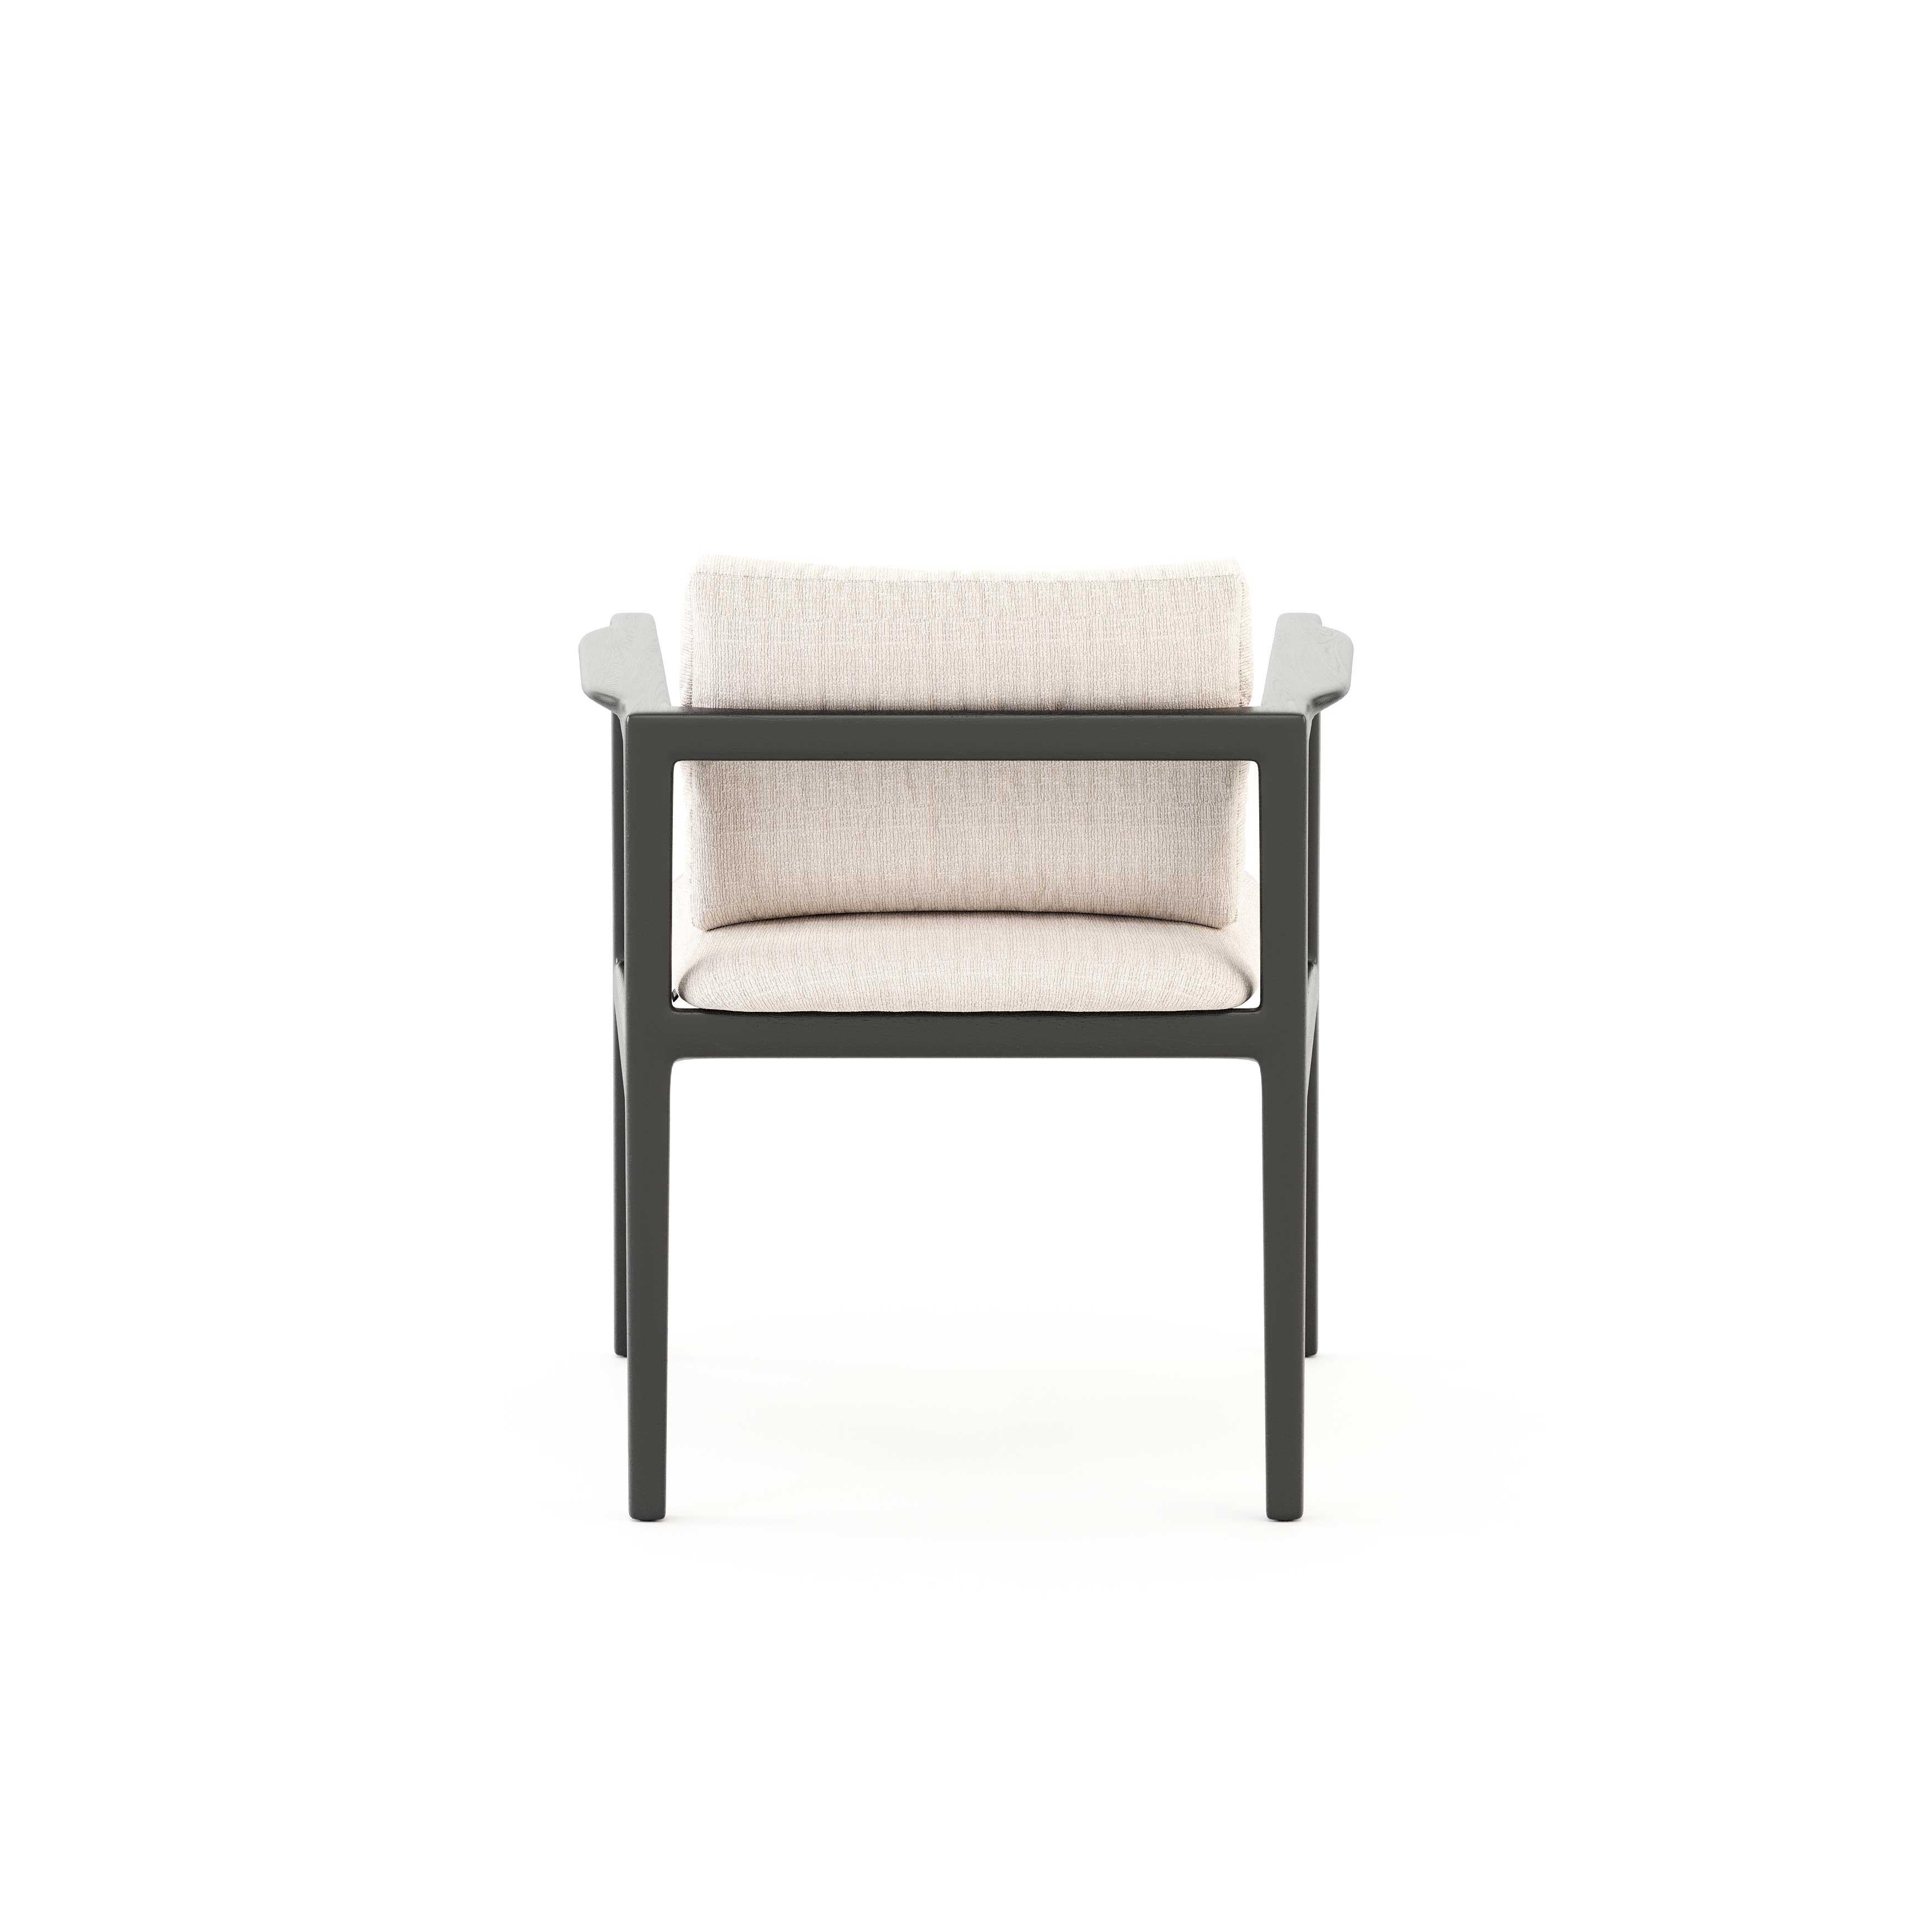 Textile Modern Toro Dining Chair made with wood and textile, Handmade by Stylish Club For Sale